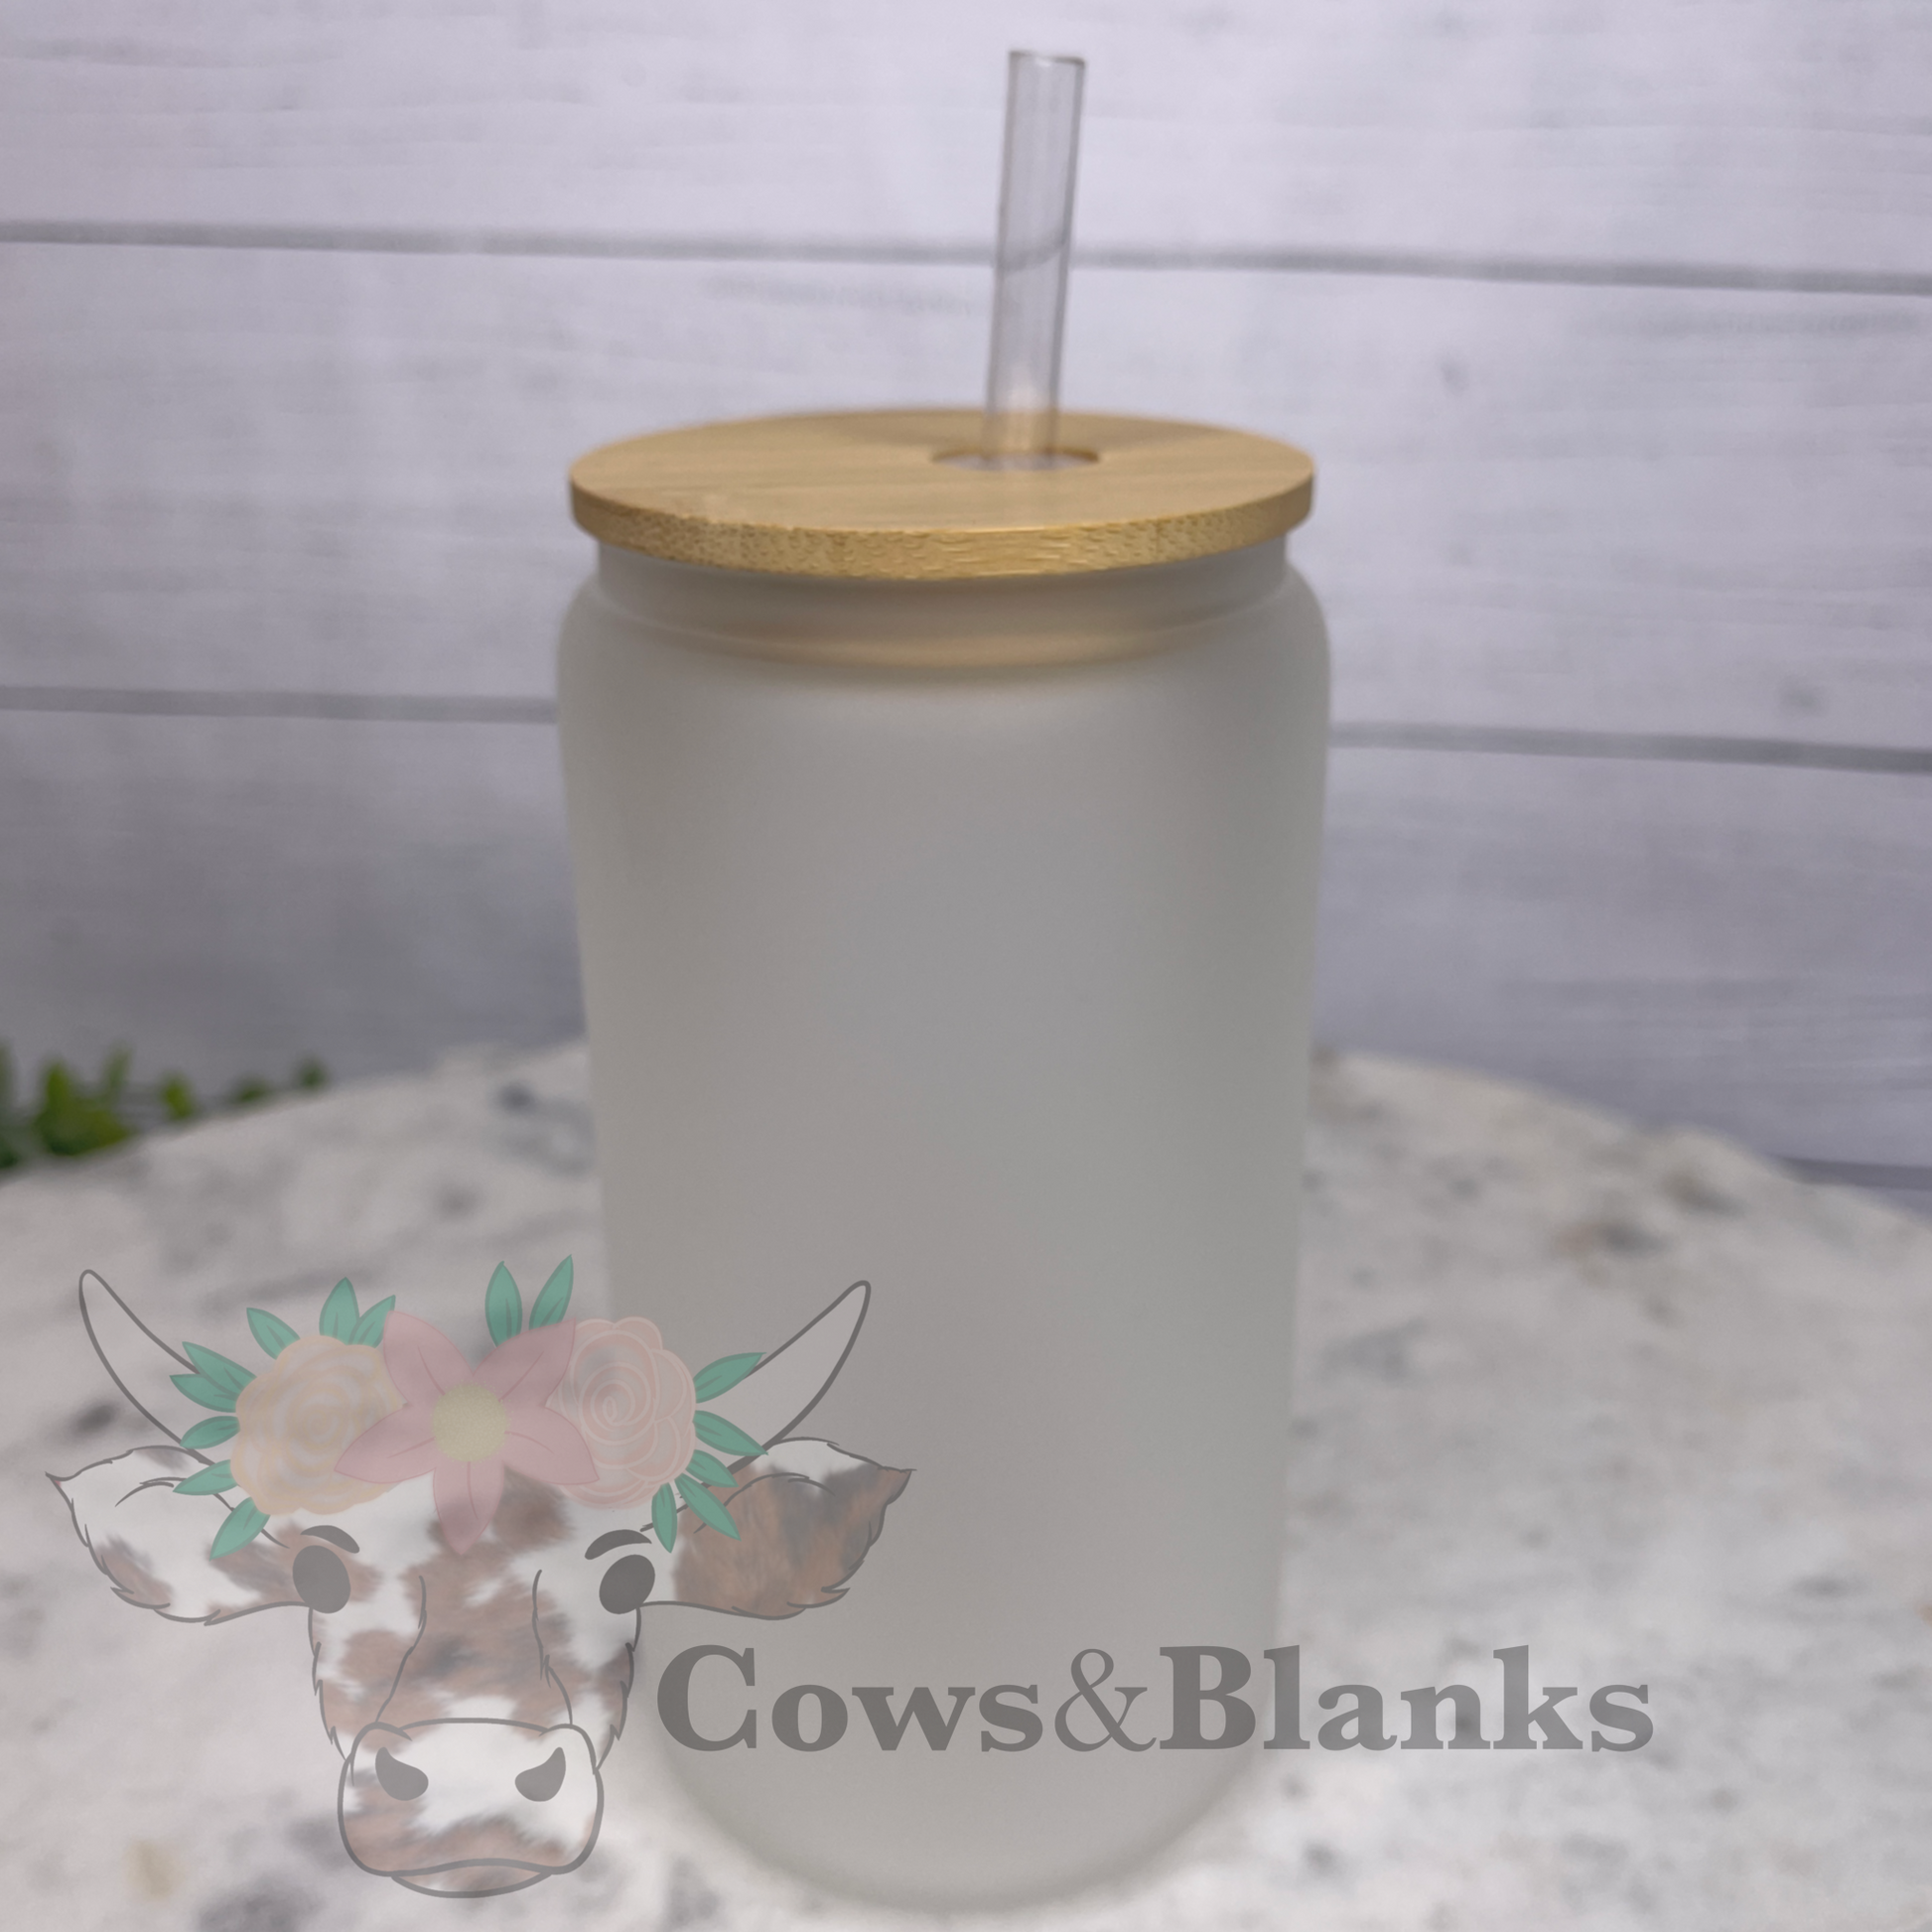 16oz Meltdown Manager Frosted Glass Libbey Cup , Sublimation